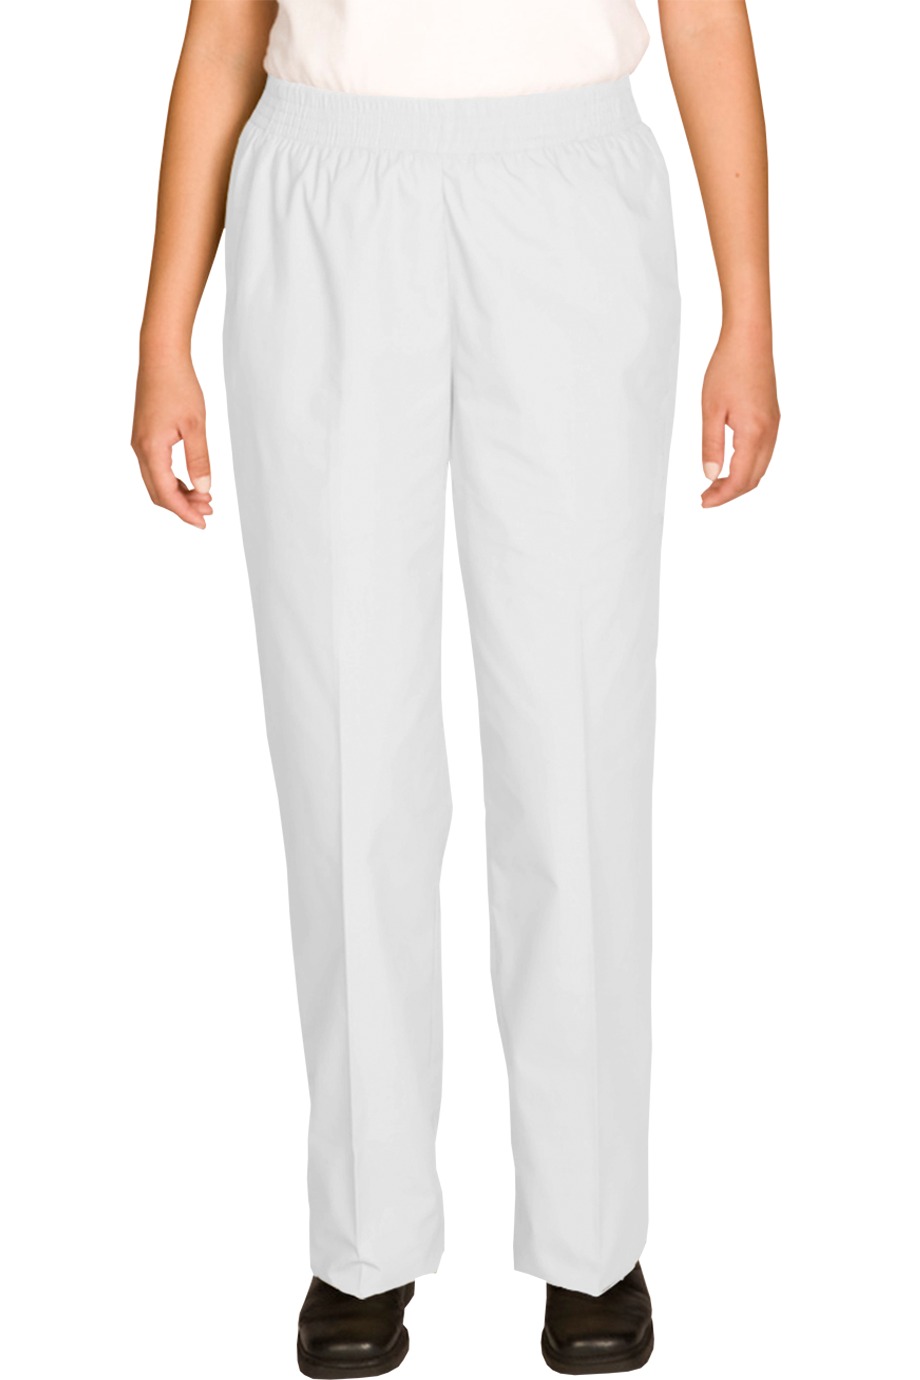 Edwards Garment 8886 - Women's Poly/Cotton Pull-On-Pant